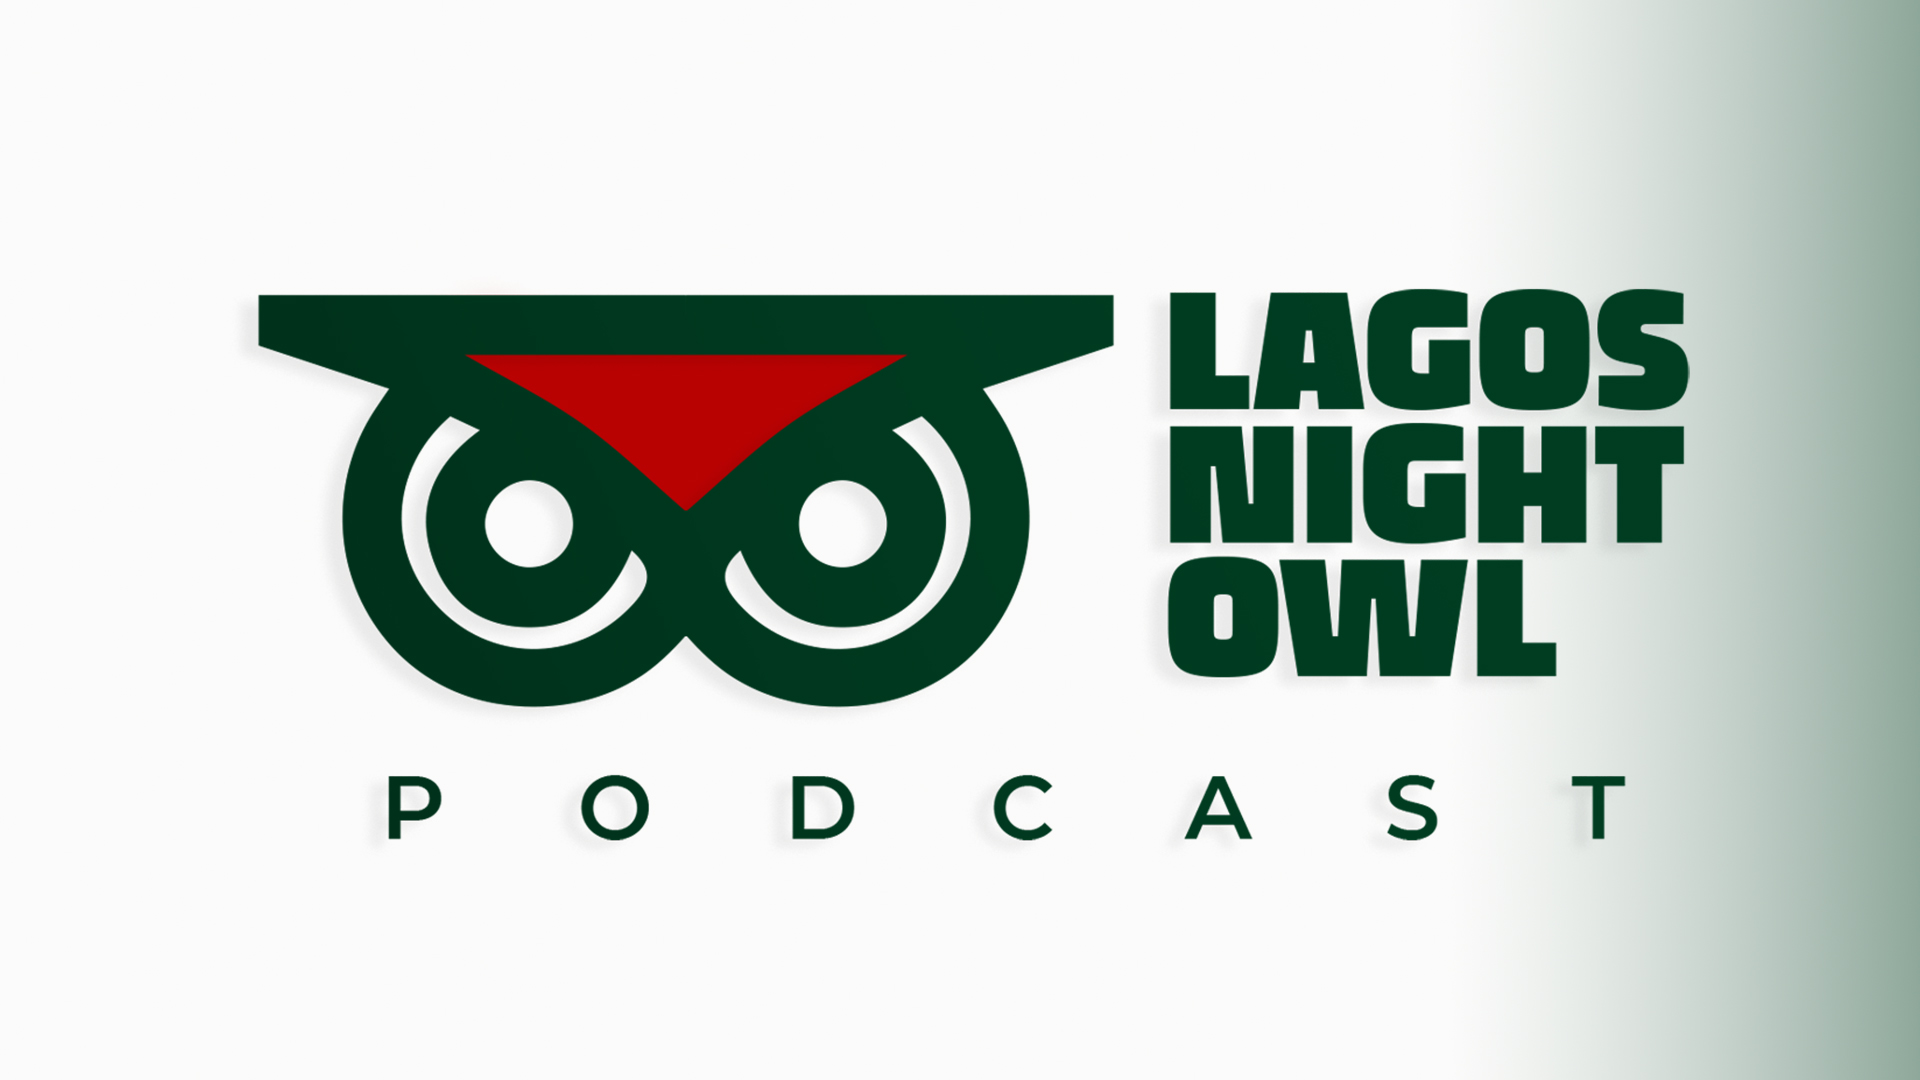 Night Owlers! Welcome to 'Lagos Night Owl Podcast' we discuss everything about the nightlife culture in Lagos, the money, the influencers, the clubs, venues, DJs, promoters, people living fake lifestyles, the creatives, drugs, women, alcohol, and more.